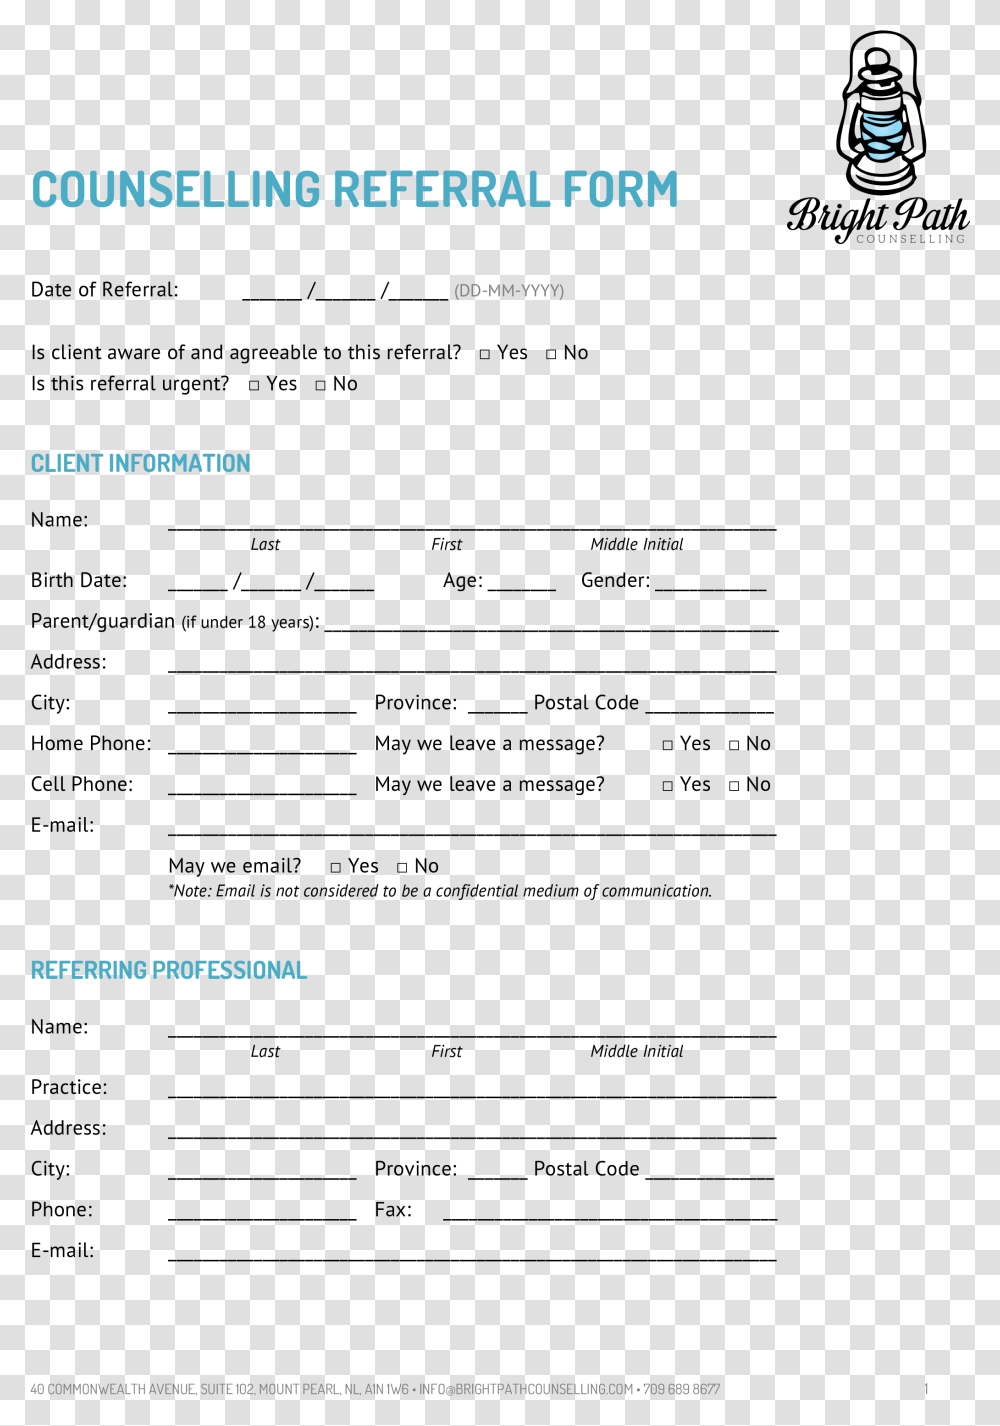 Certificate Sample Unique Dcbuscharter Of Bcd7a922 Counselling Referral Form Templates, Legend Of Zelda Transparent Png